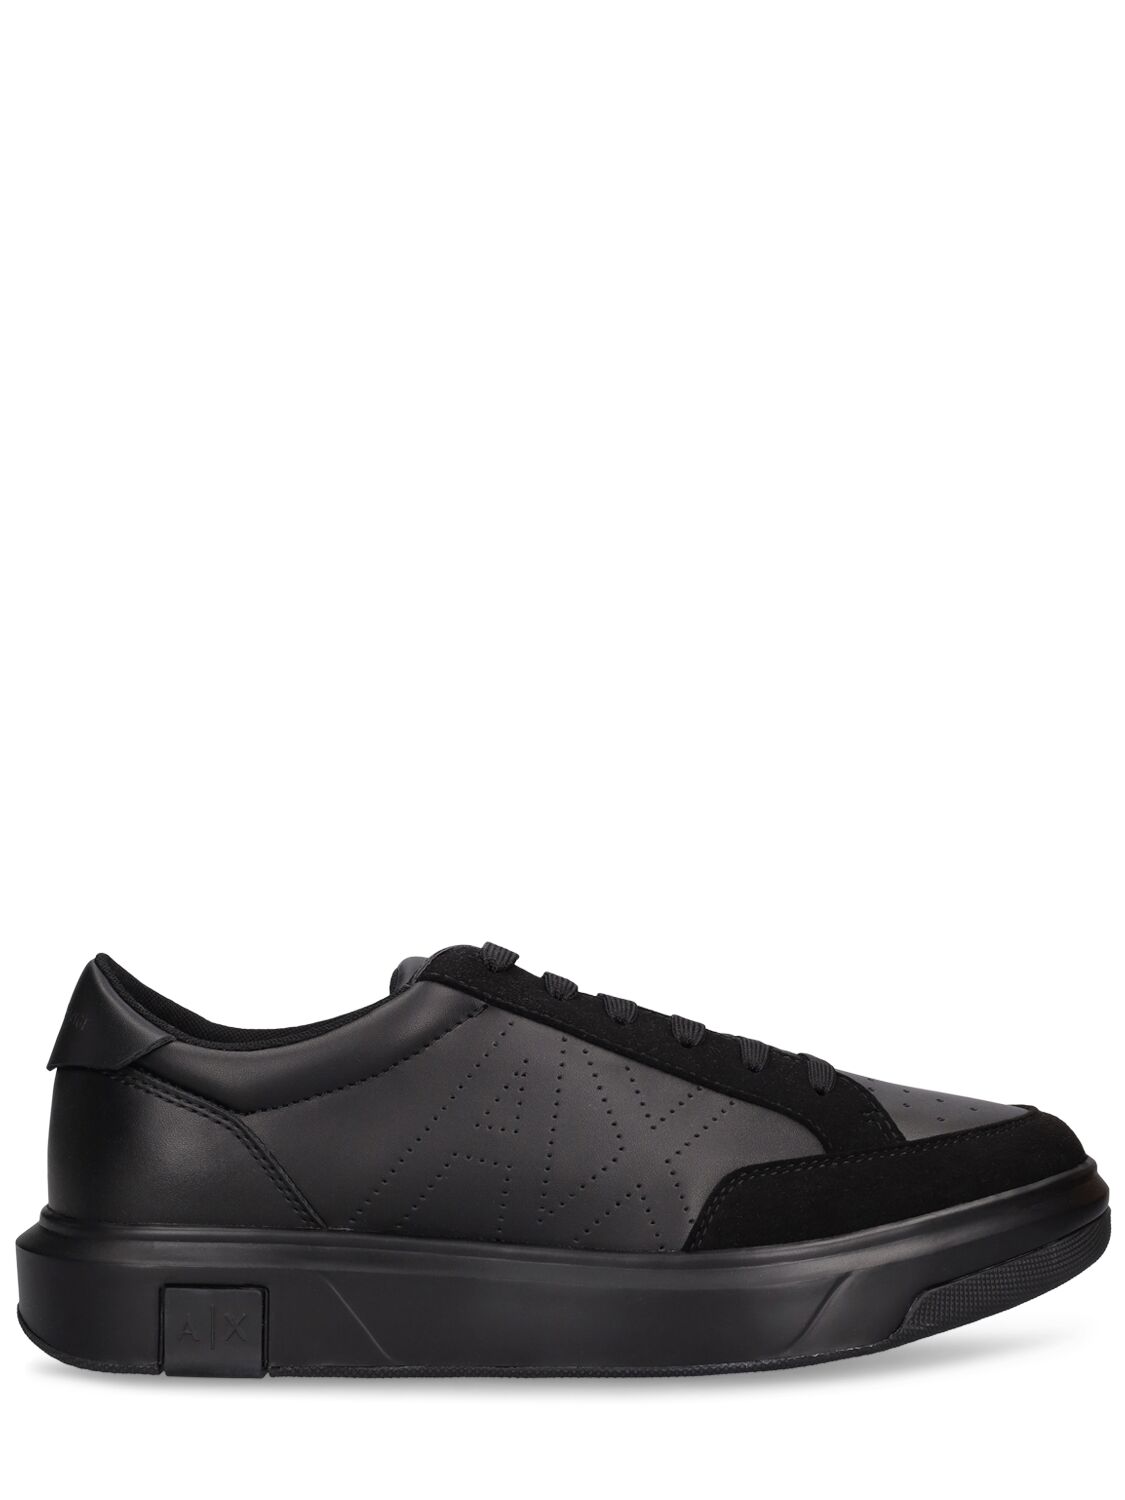 Armani Exchange Leather Low Top Sneakers In Black